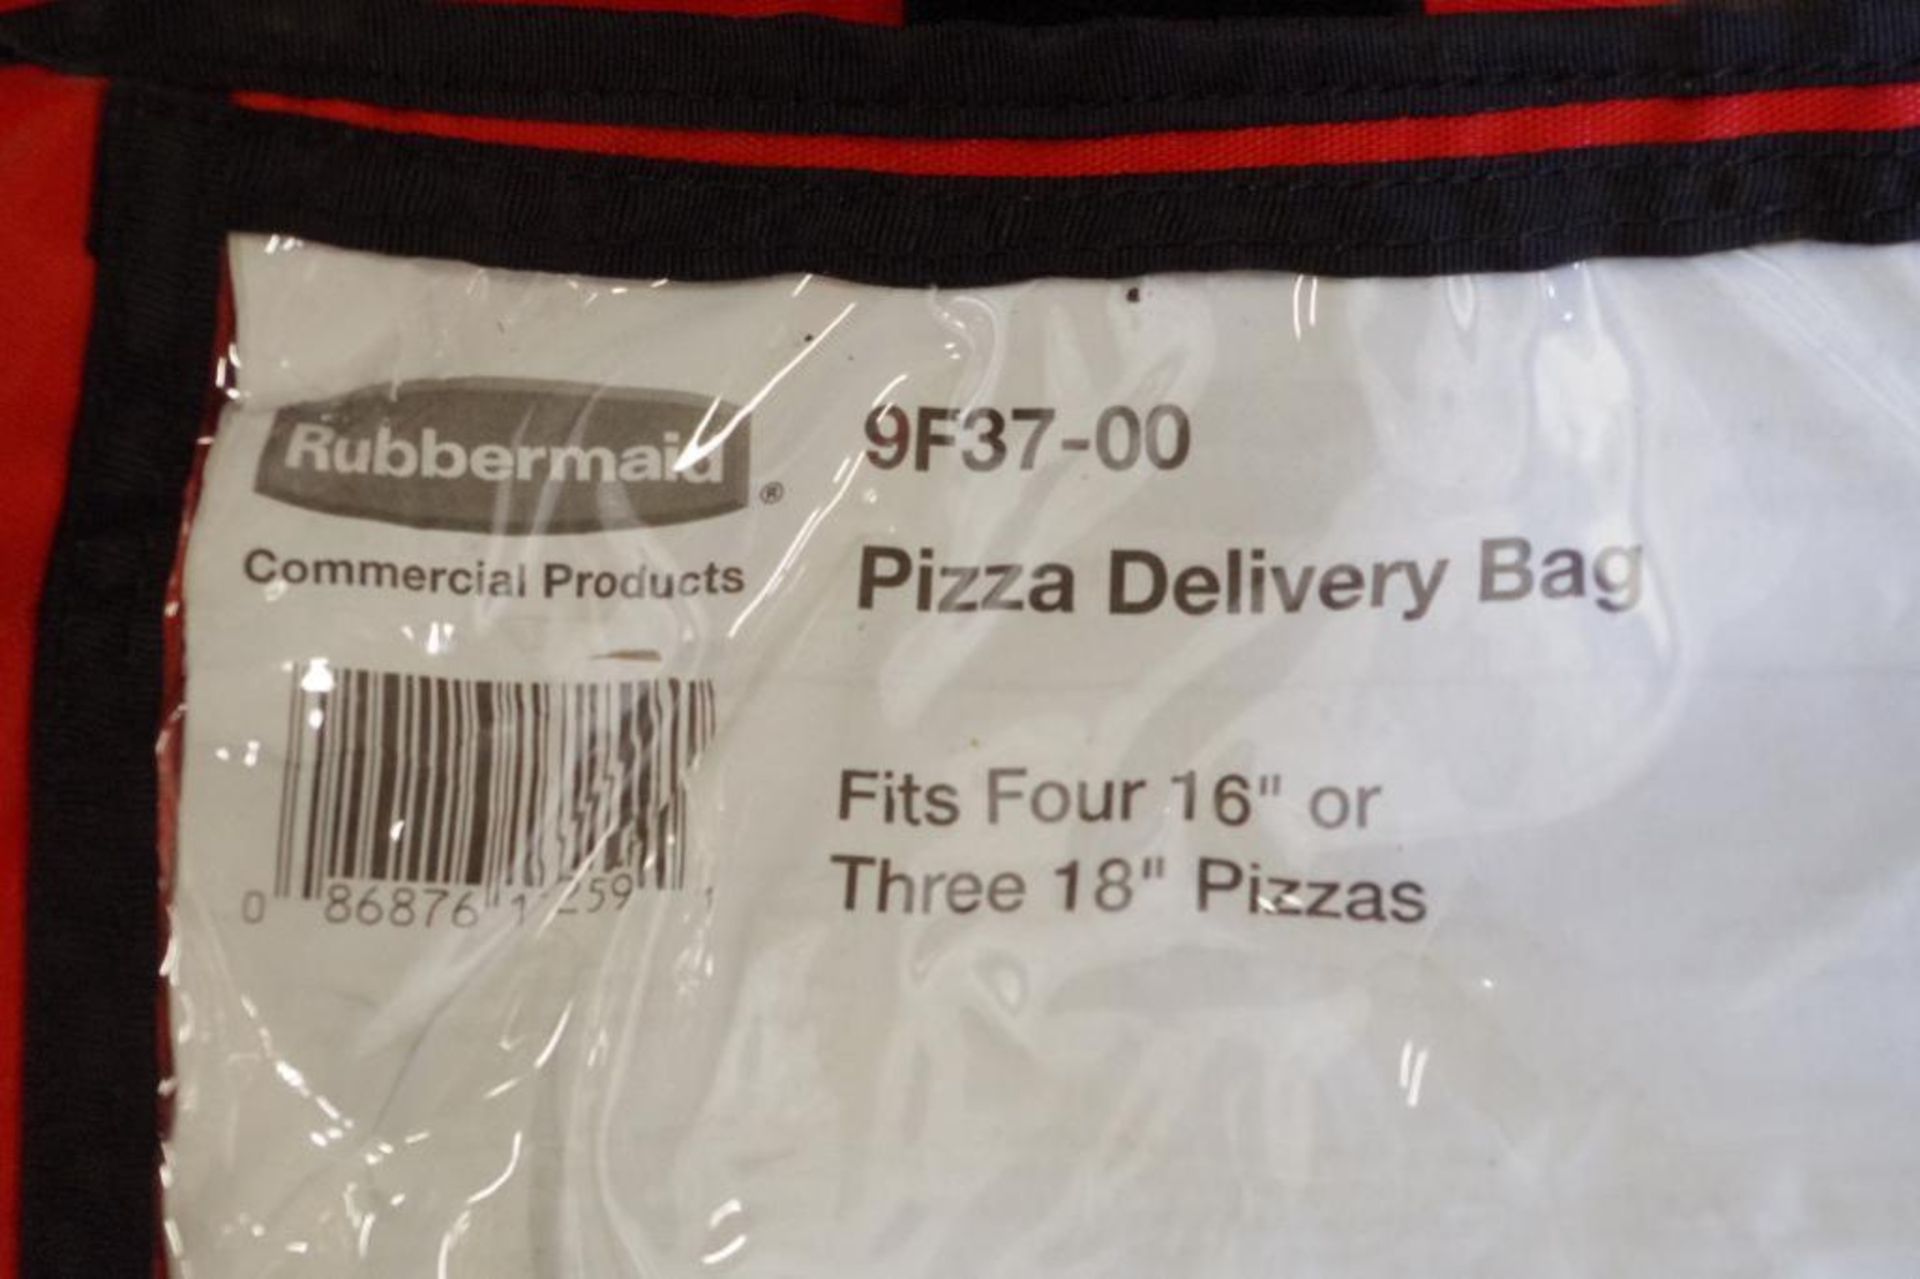 [2] RUBBERMAID Pizza Delivery Bags, Fits Four 16" or Three 18" Pizzas, M/N 9F37-00 - Image 5 of 5